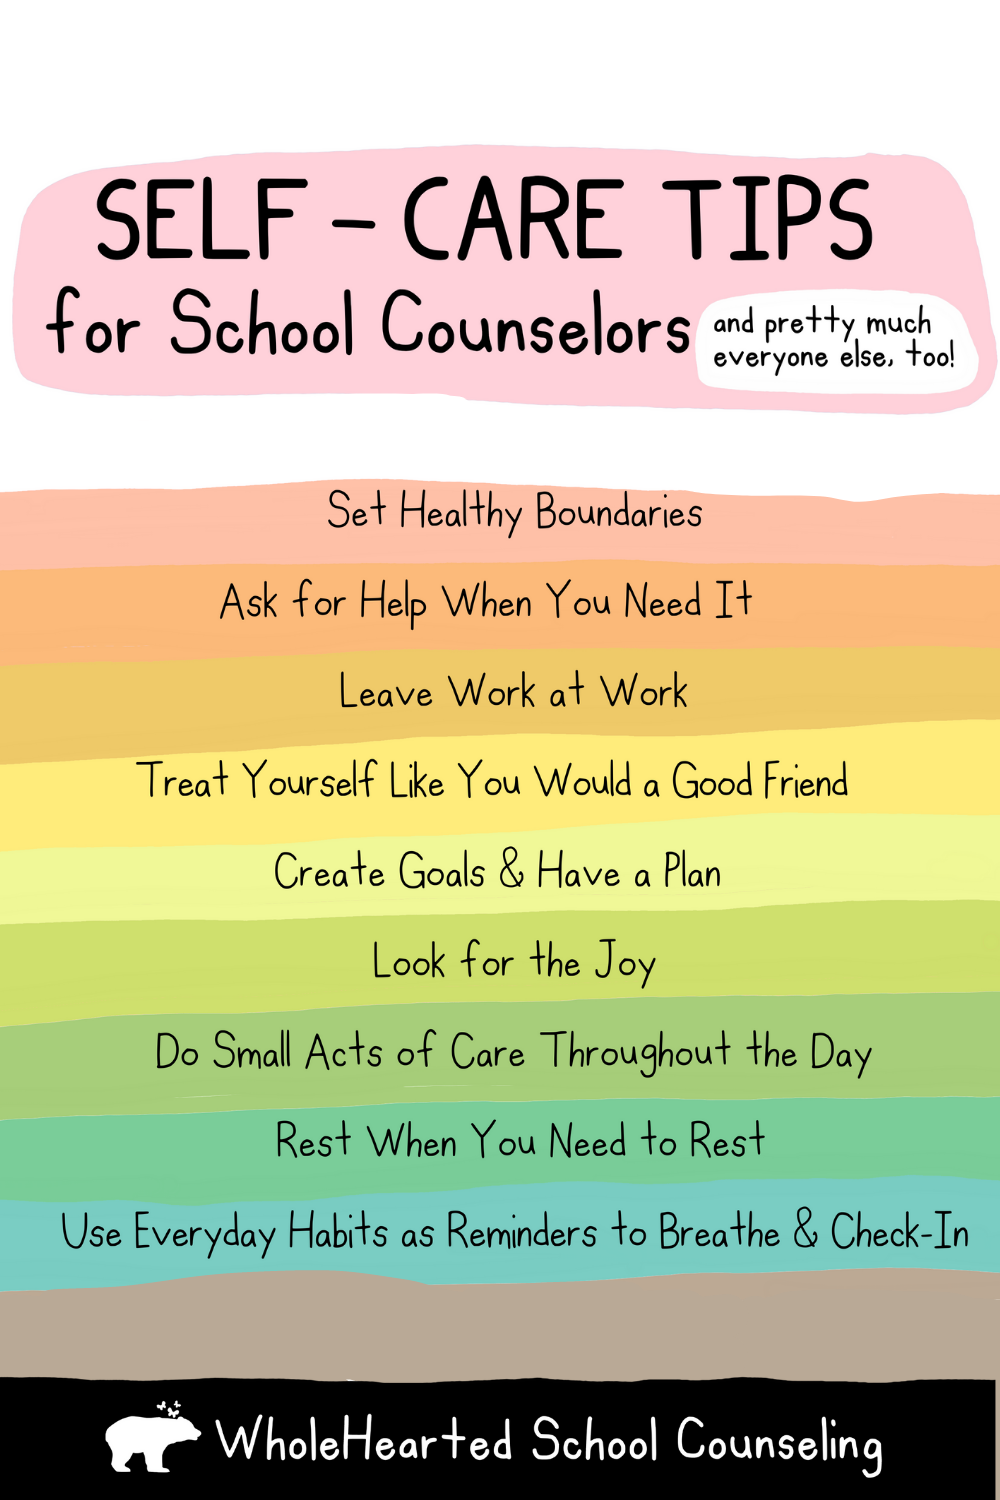 List of Self-Care for School Counselors by WholeHearted School Counseling